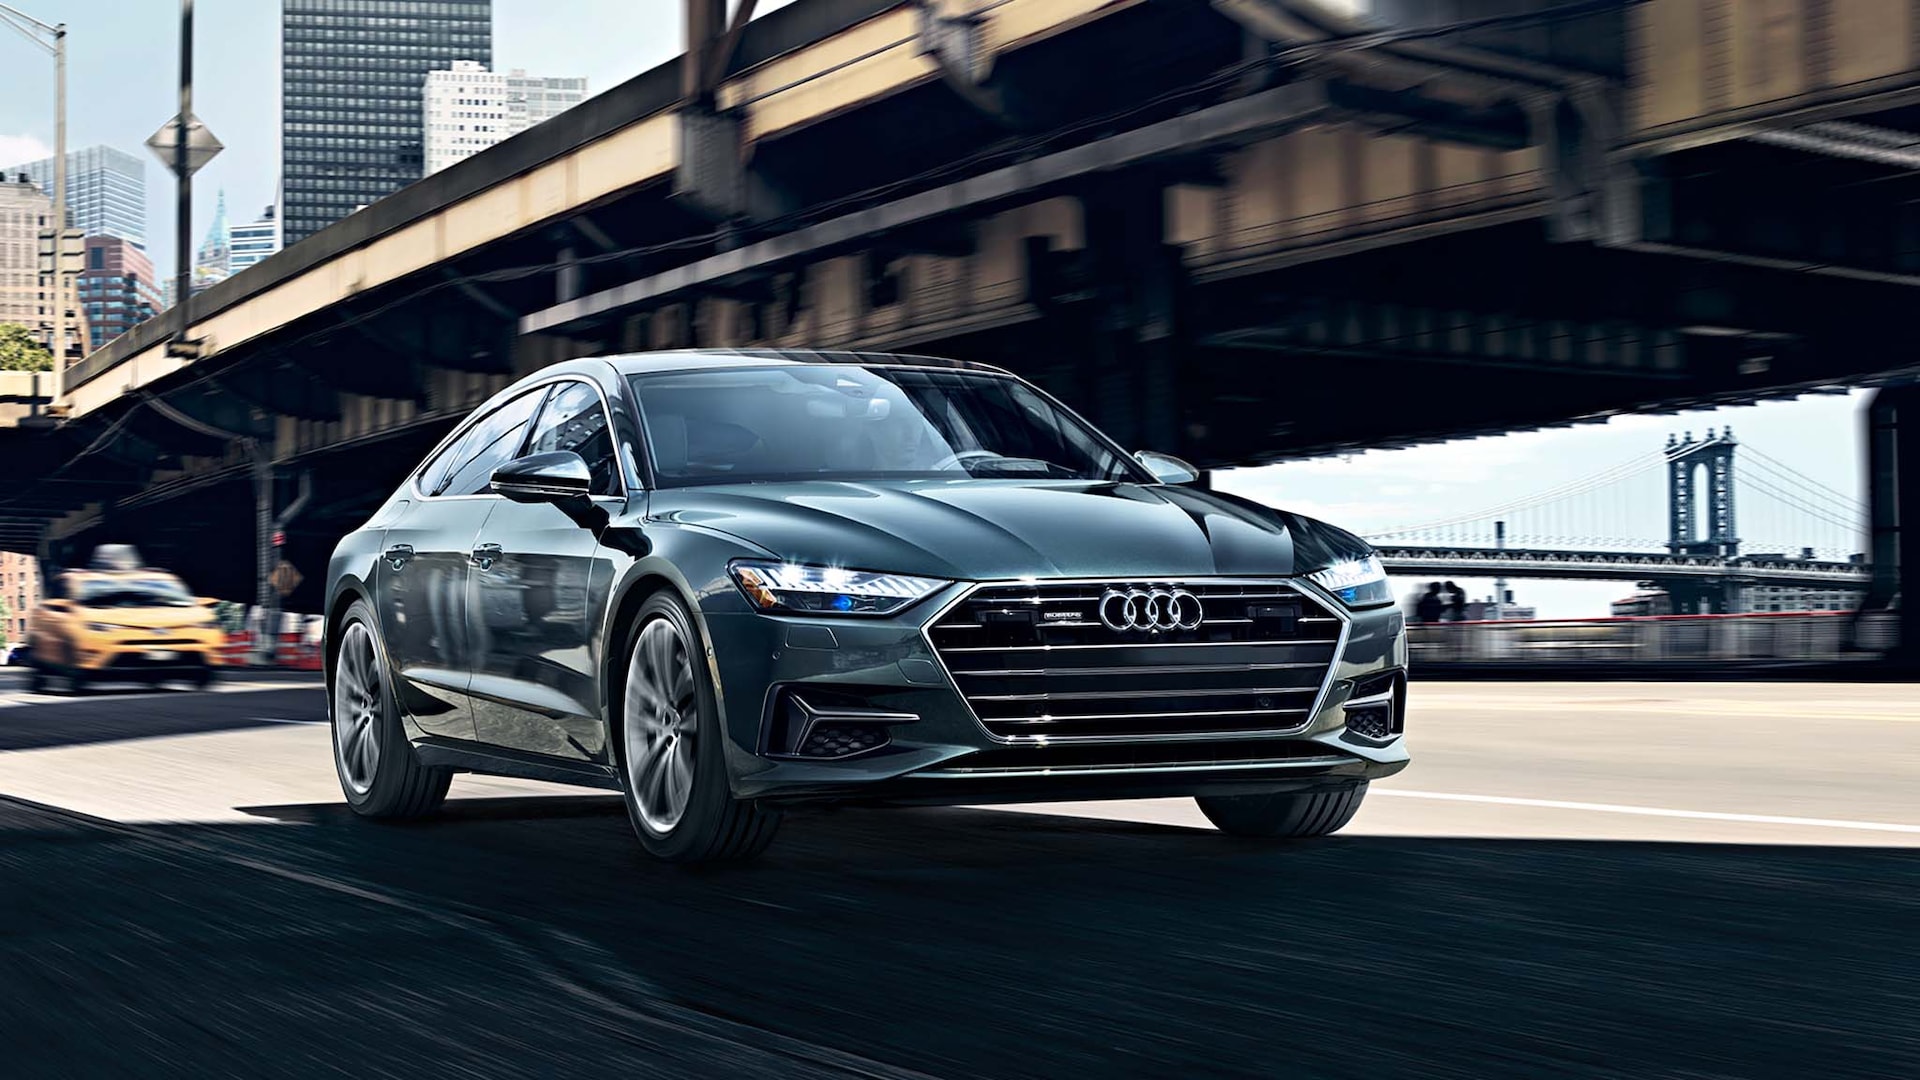 2020 Audi A7 Prices, Reviews, and Photos - MotorTrend